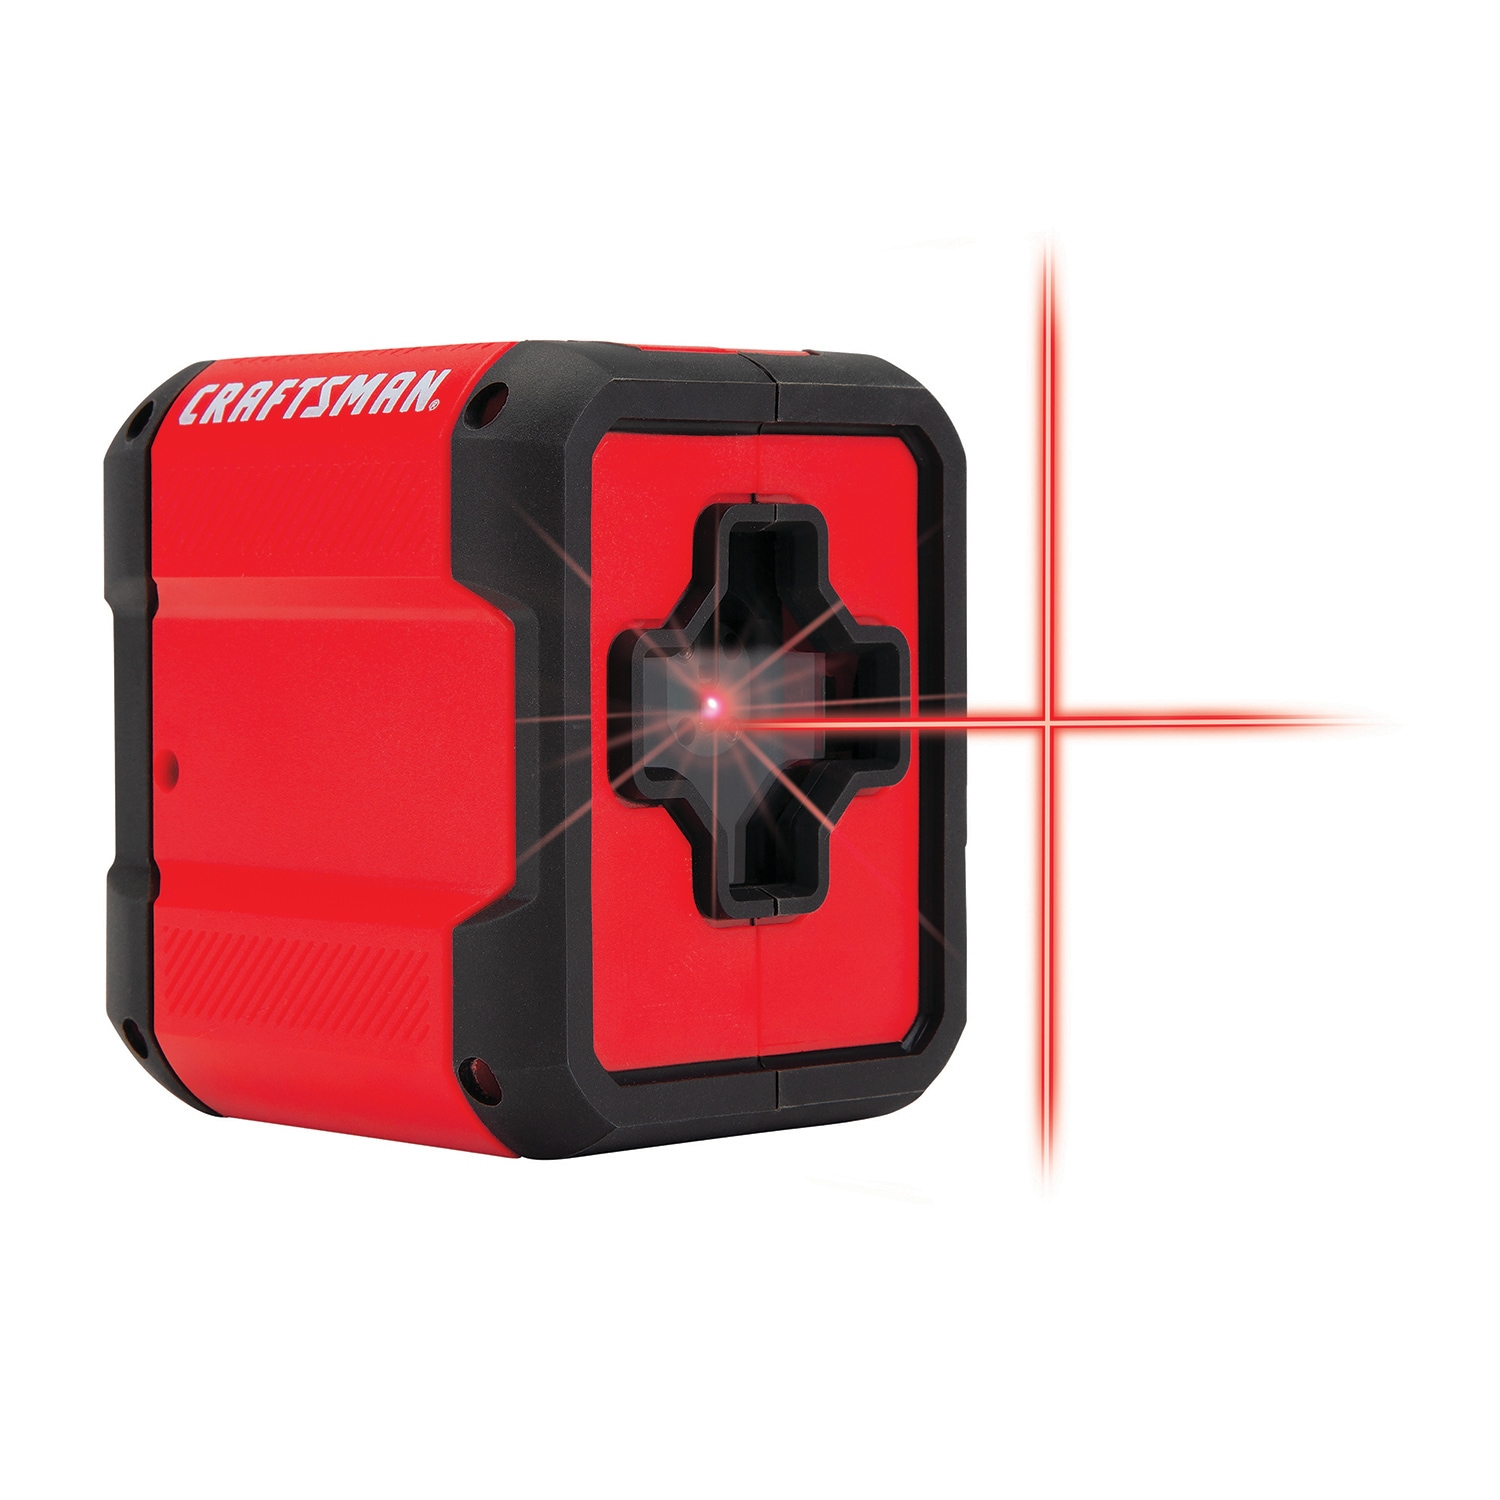 Huepar 12 Lines 3D Self-Leveling Laser Level with LCD Screen 3x360  Bluetooth Connected Green Beam Cross Line Level Tool -360  Horizontal/Vertical Laser